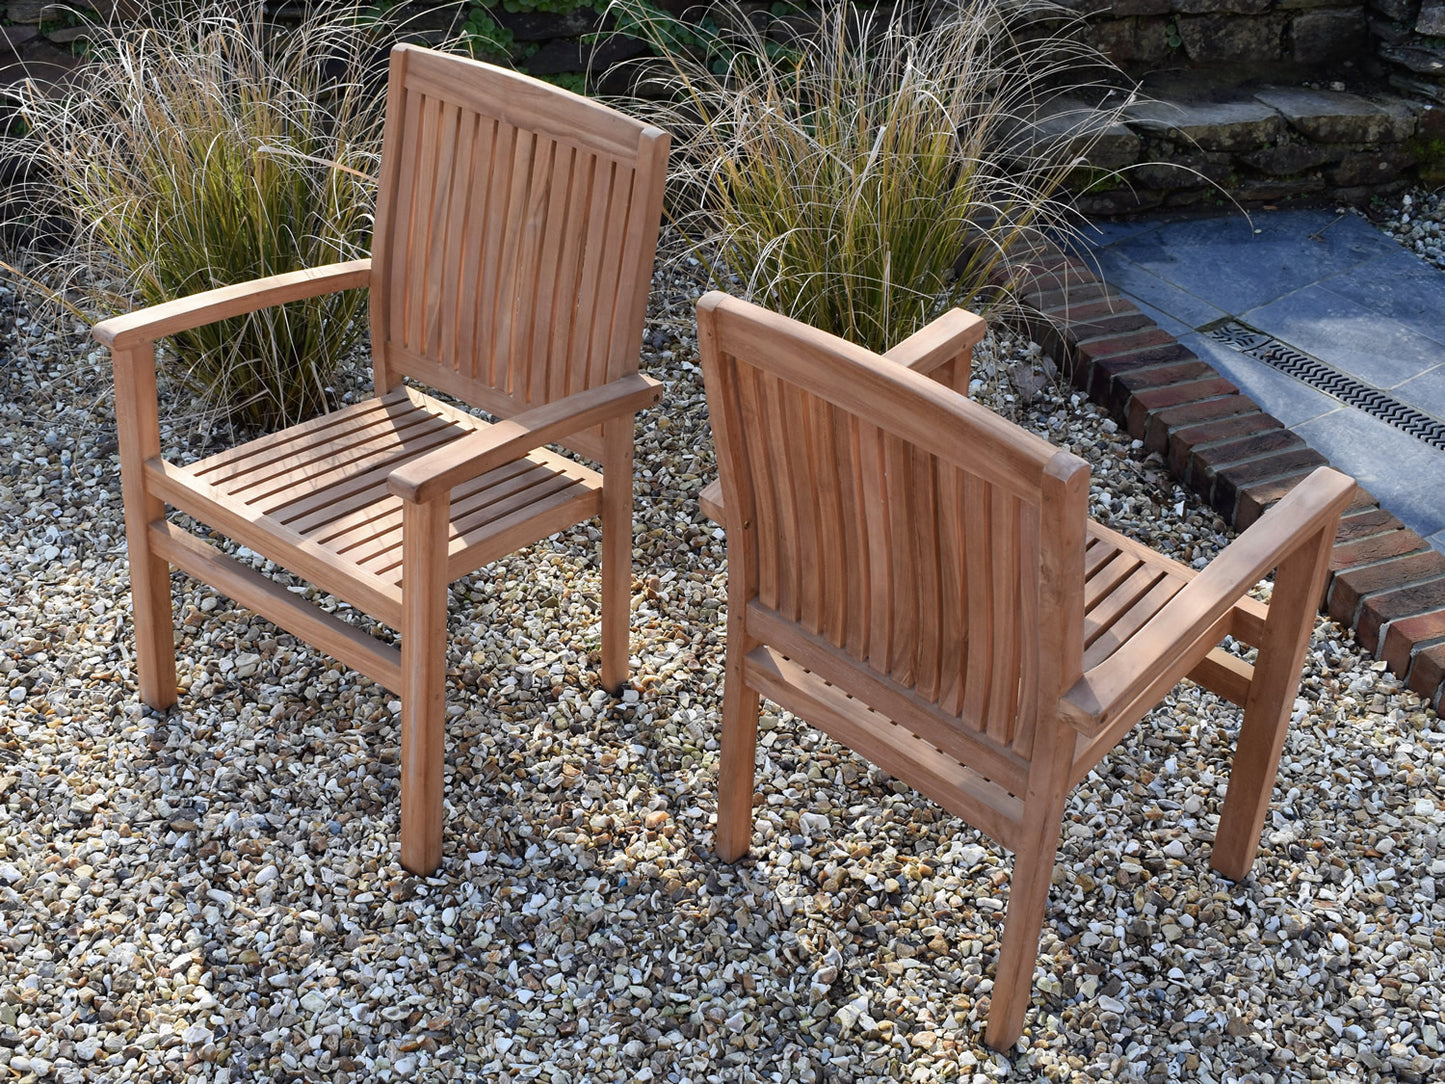 10 Seater Rectangular Extending Teak Set with Dining Chairs & Stacking Armchairs